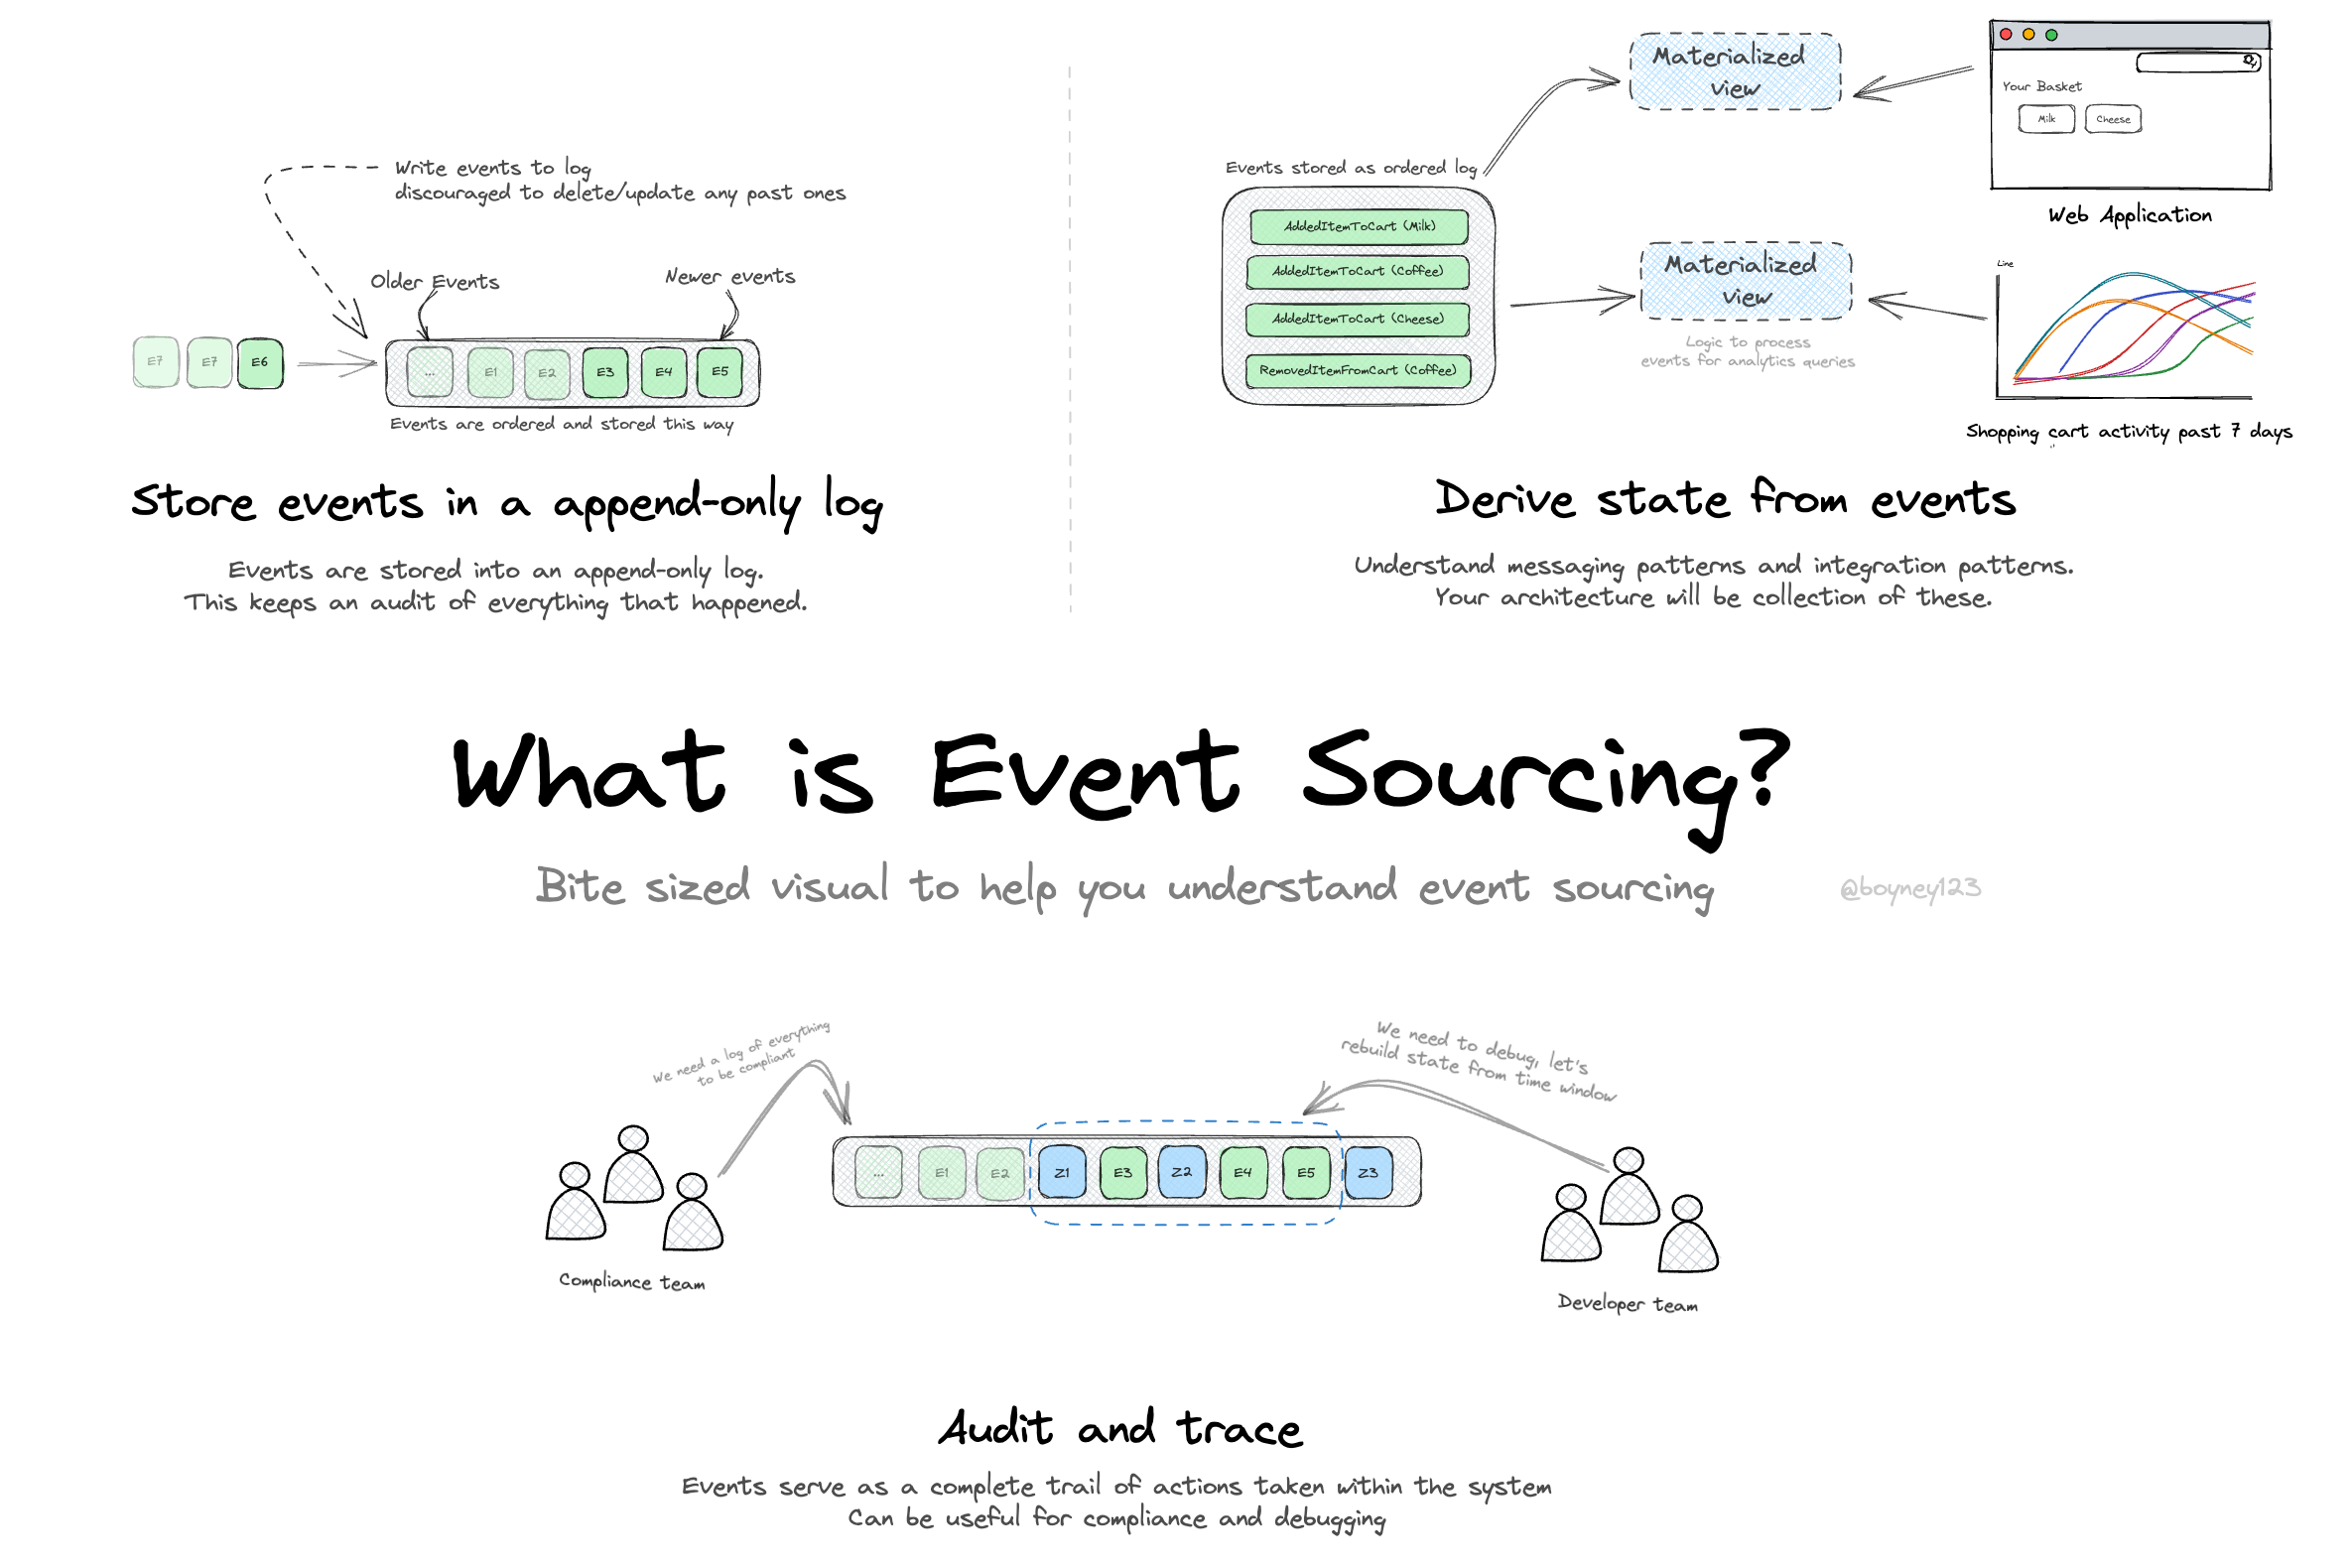 What is Event Sourcing?